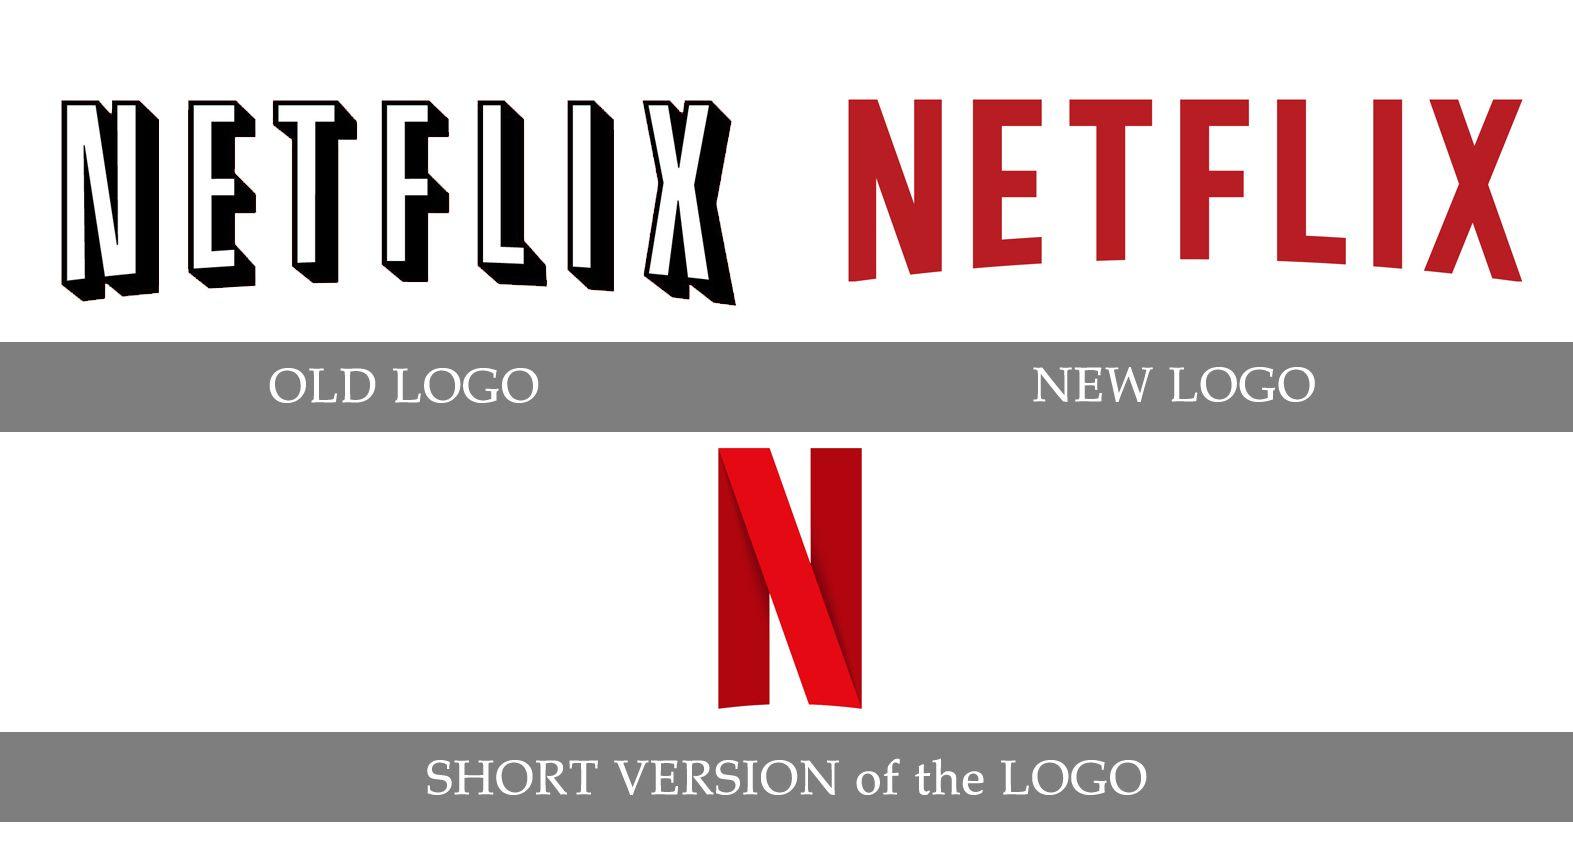 Netflix 2000 Logo - Netflix Logo, Netflix Symbol, Meaning, History and Evolution